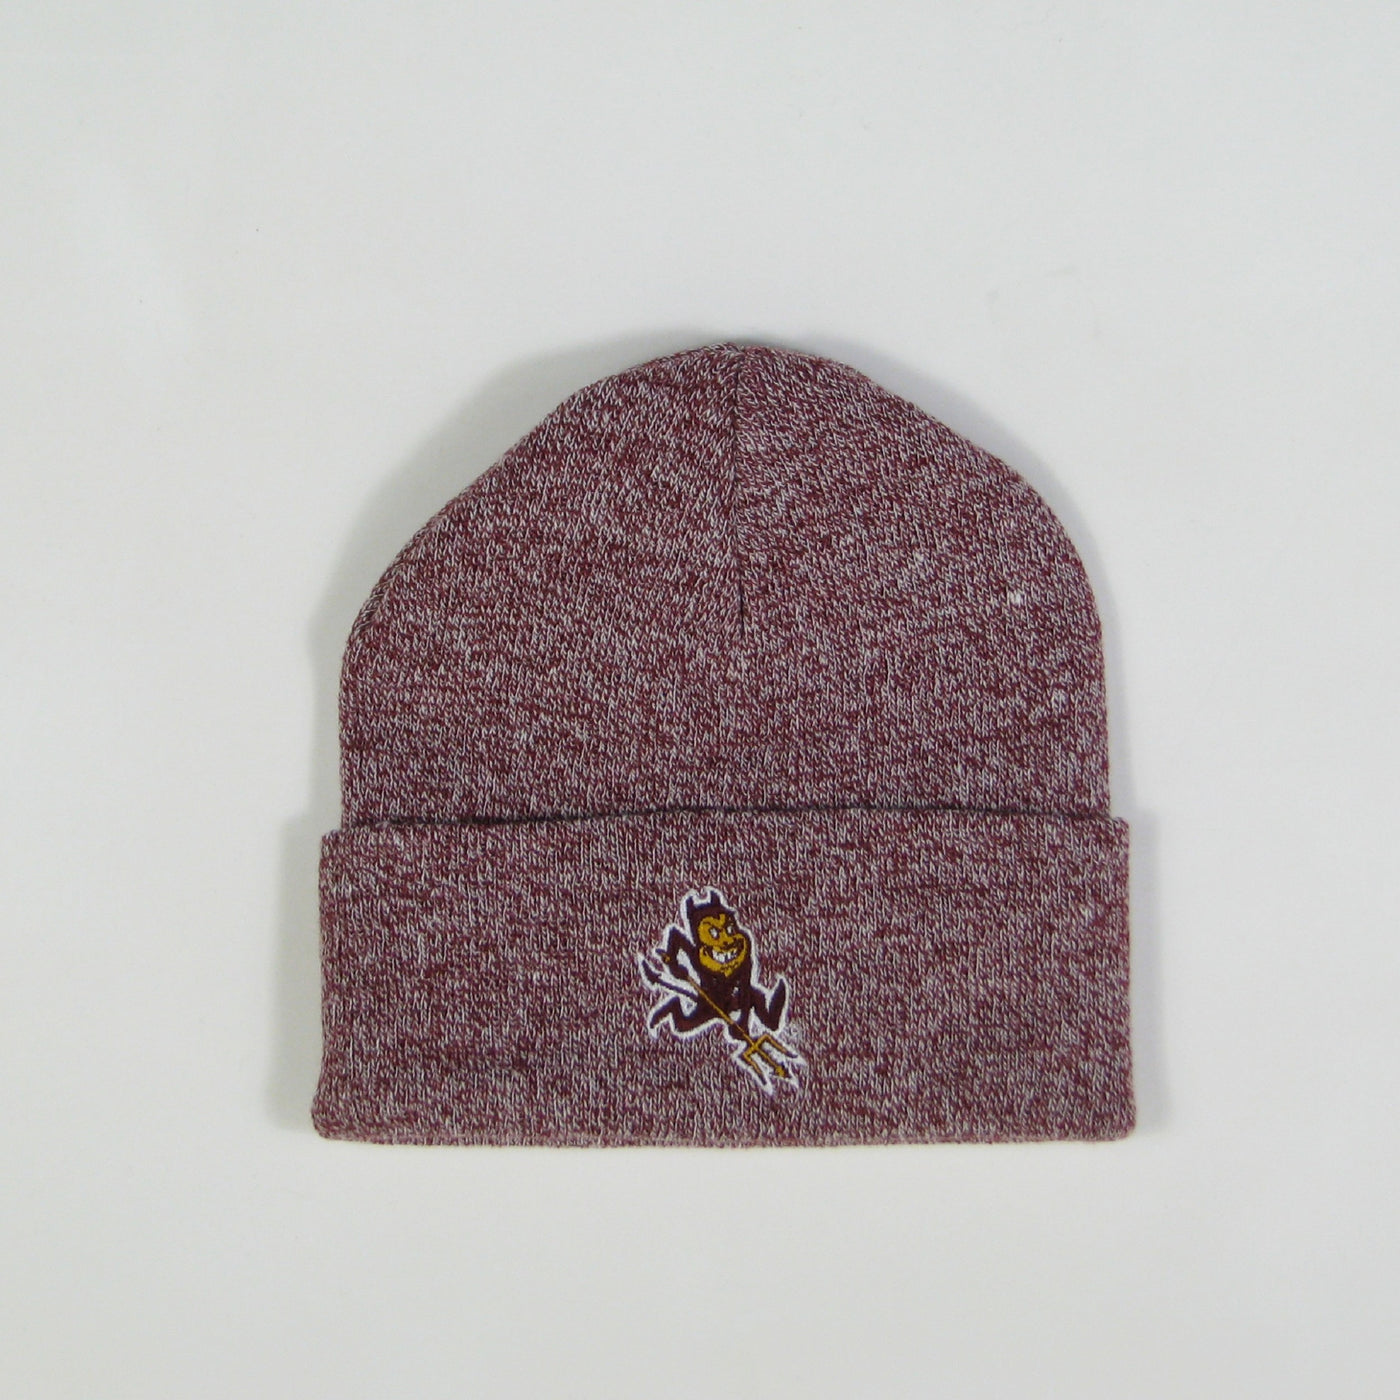 ASU maroon cuffed beanie with a Sparky patch on the cuff